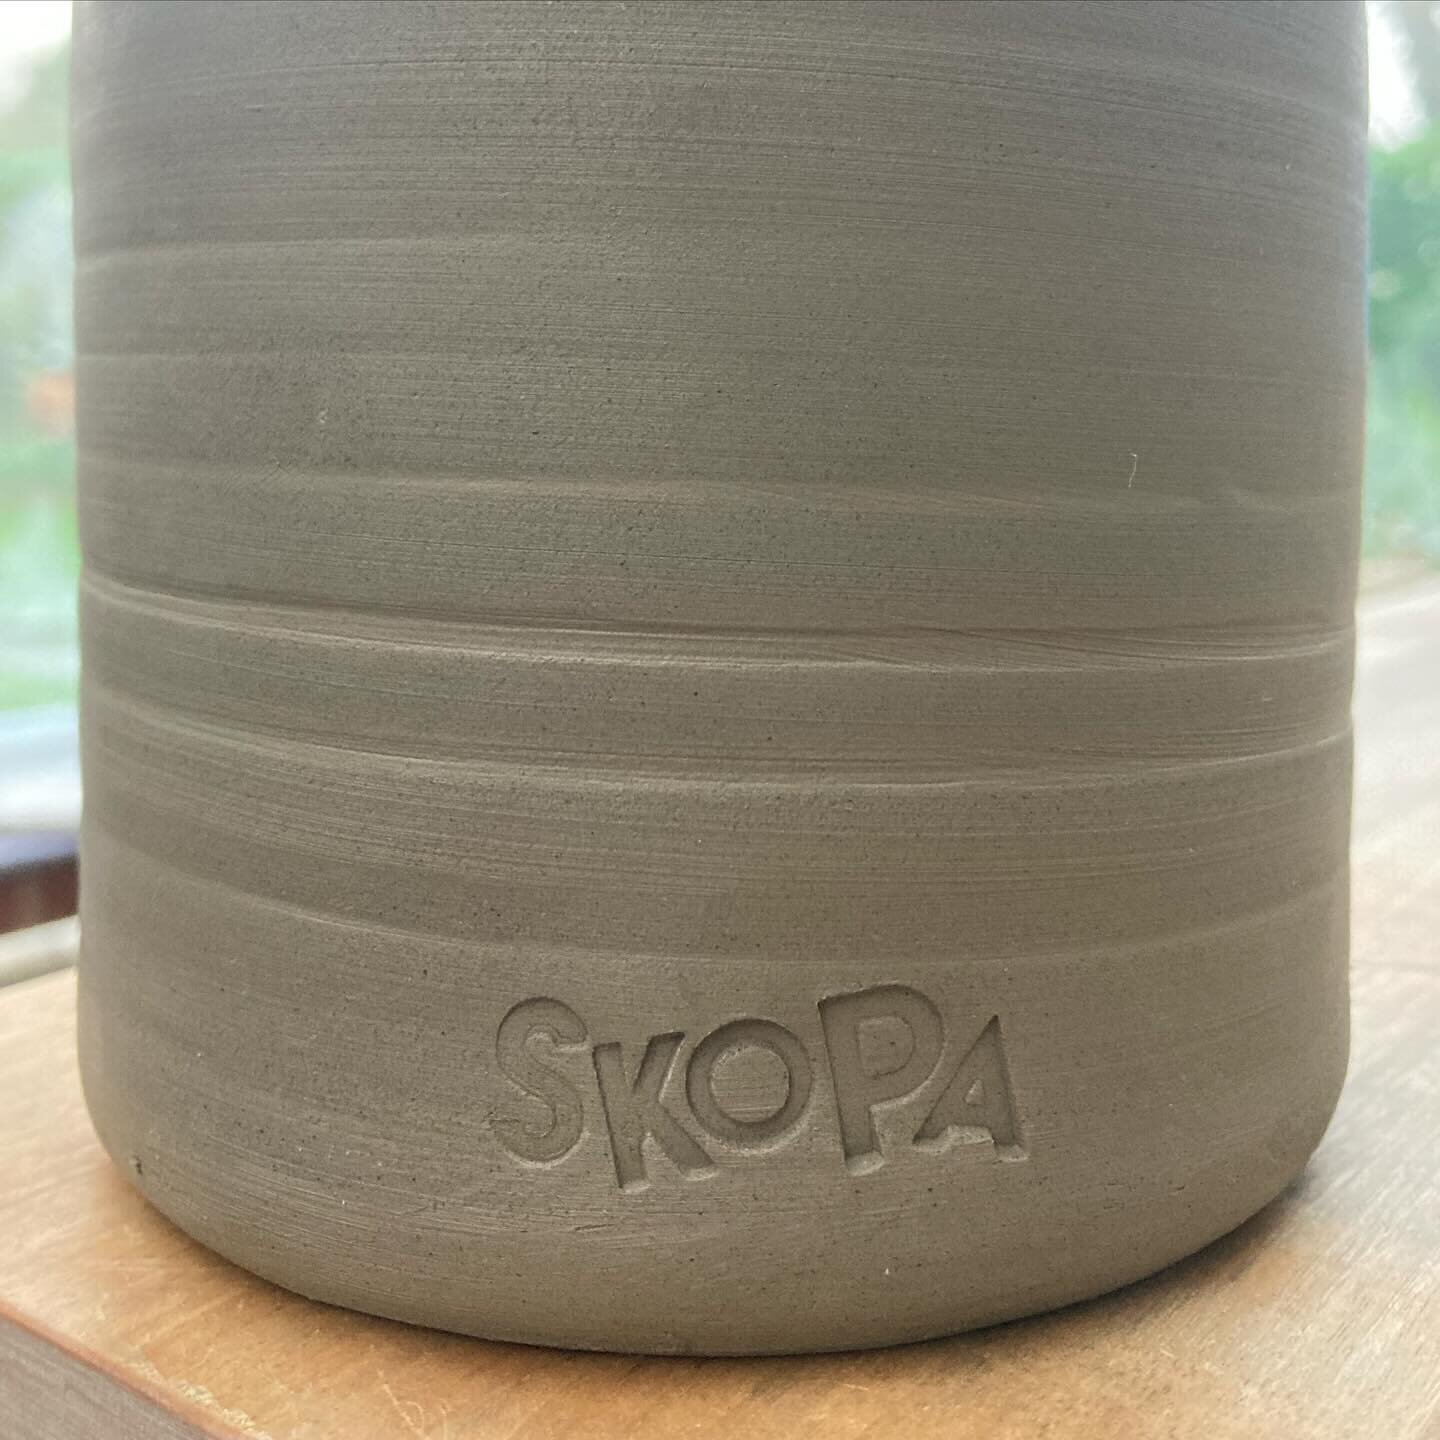 Buird x Skopa
.
.
We love a stamp! Really enjoying using this one from @englishstamp on our new storage jars for @skopazerowasteplace in Wirksworth. Look out for jars in different colours just in time for Christmas. 
.
.
#ceramicstoragejars 
#buirdpo